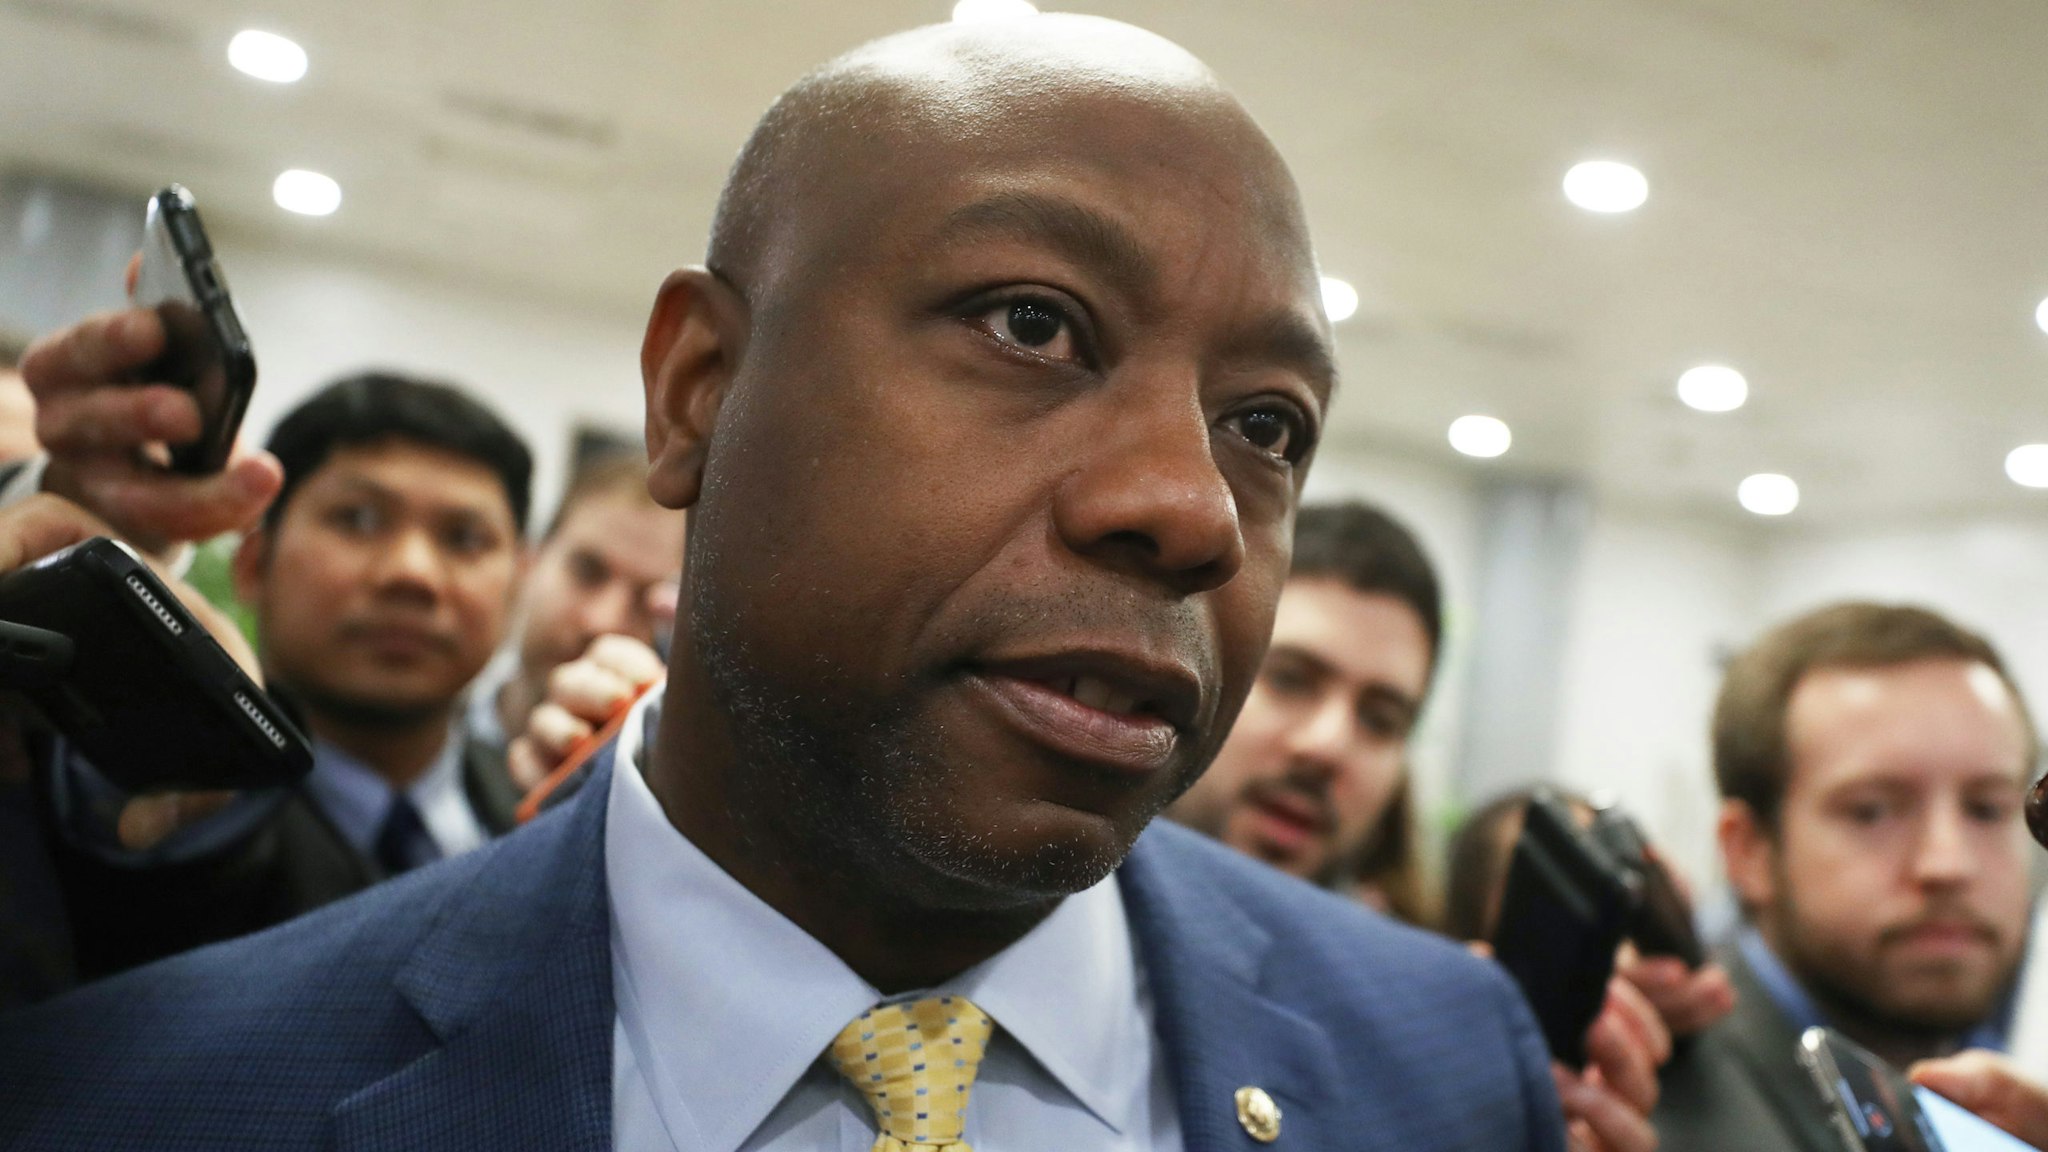 Sen. Tim Scott (R-SC) speaks to reporters as he arrives at the U.S. Capitol as the Senate impeachment trial of U.S. President Donald Trump continues on January 31, 2020 in Washington, DC. Senators are expected to vote on whether to allow witnesses to testify in the trial today.